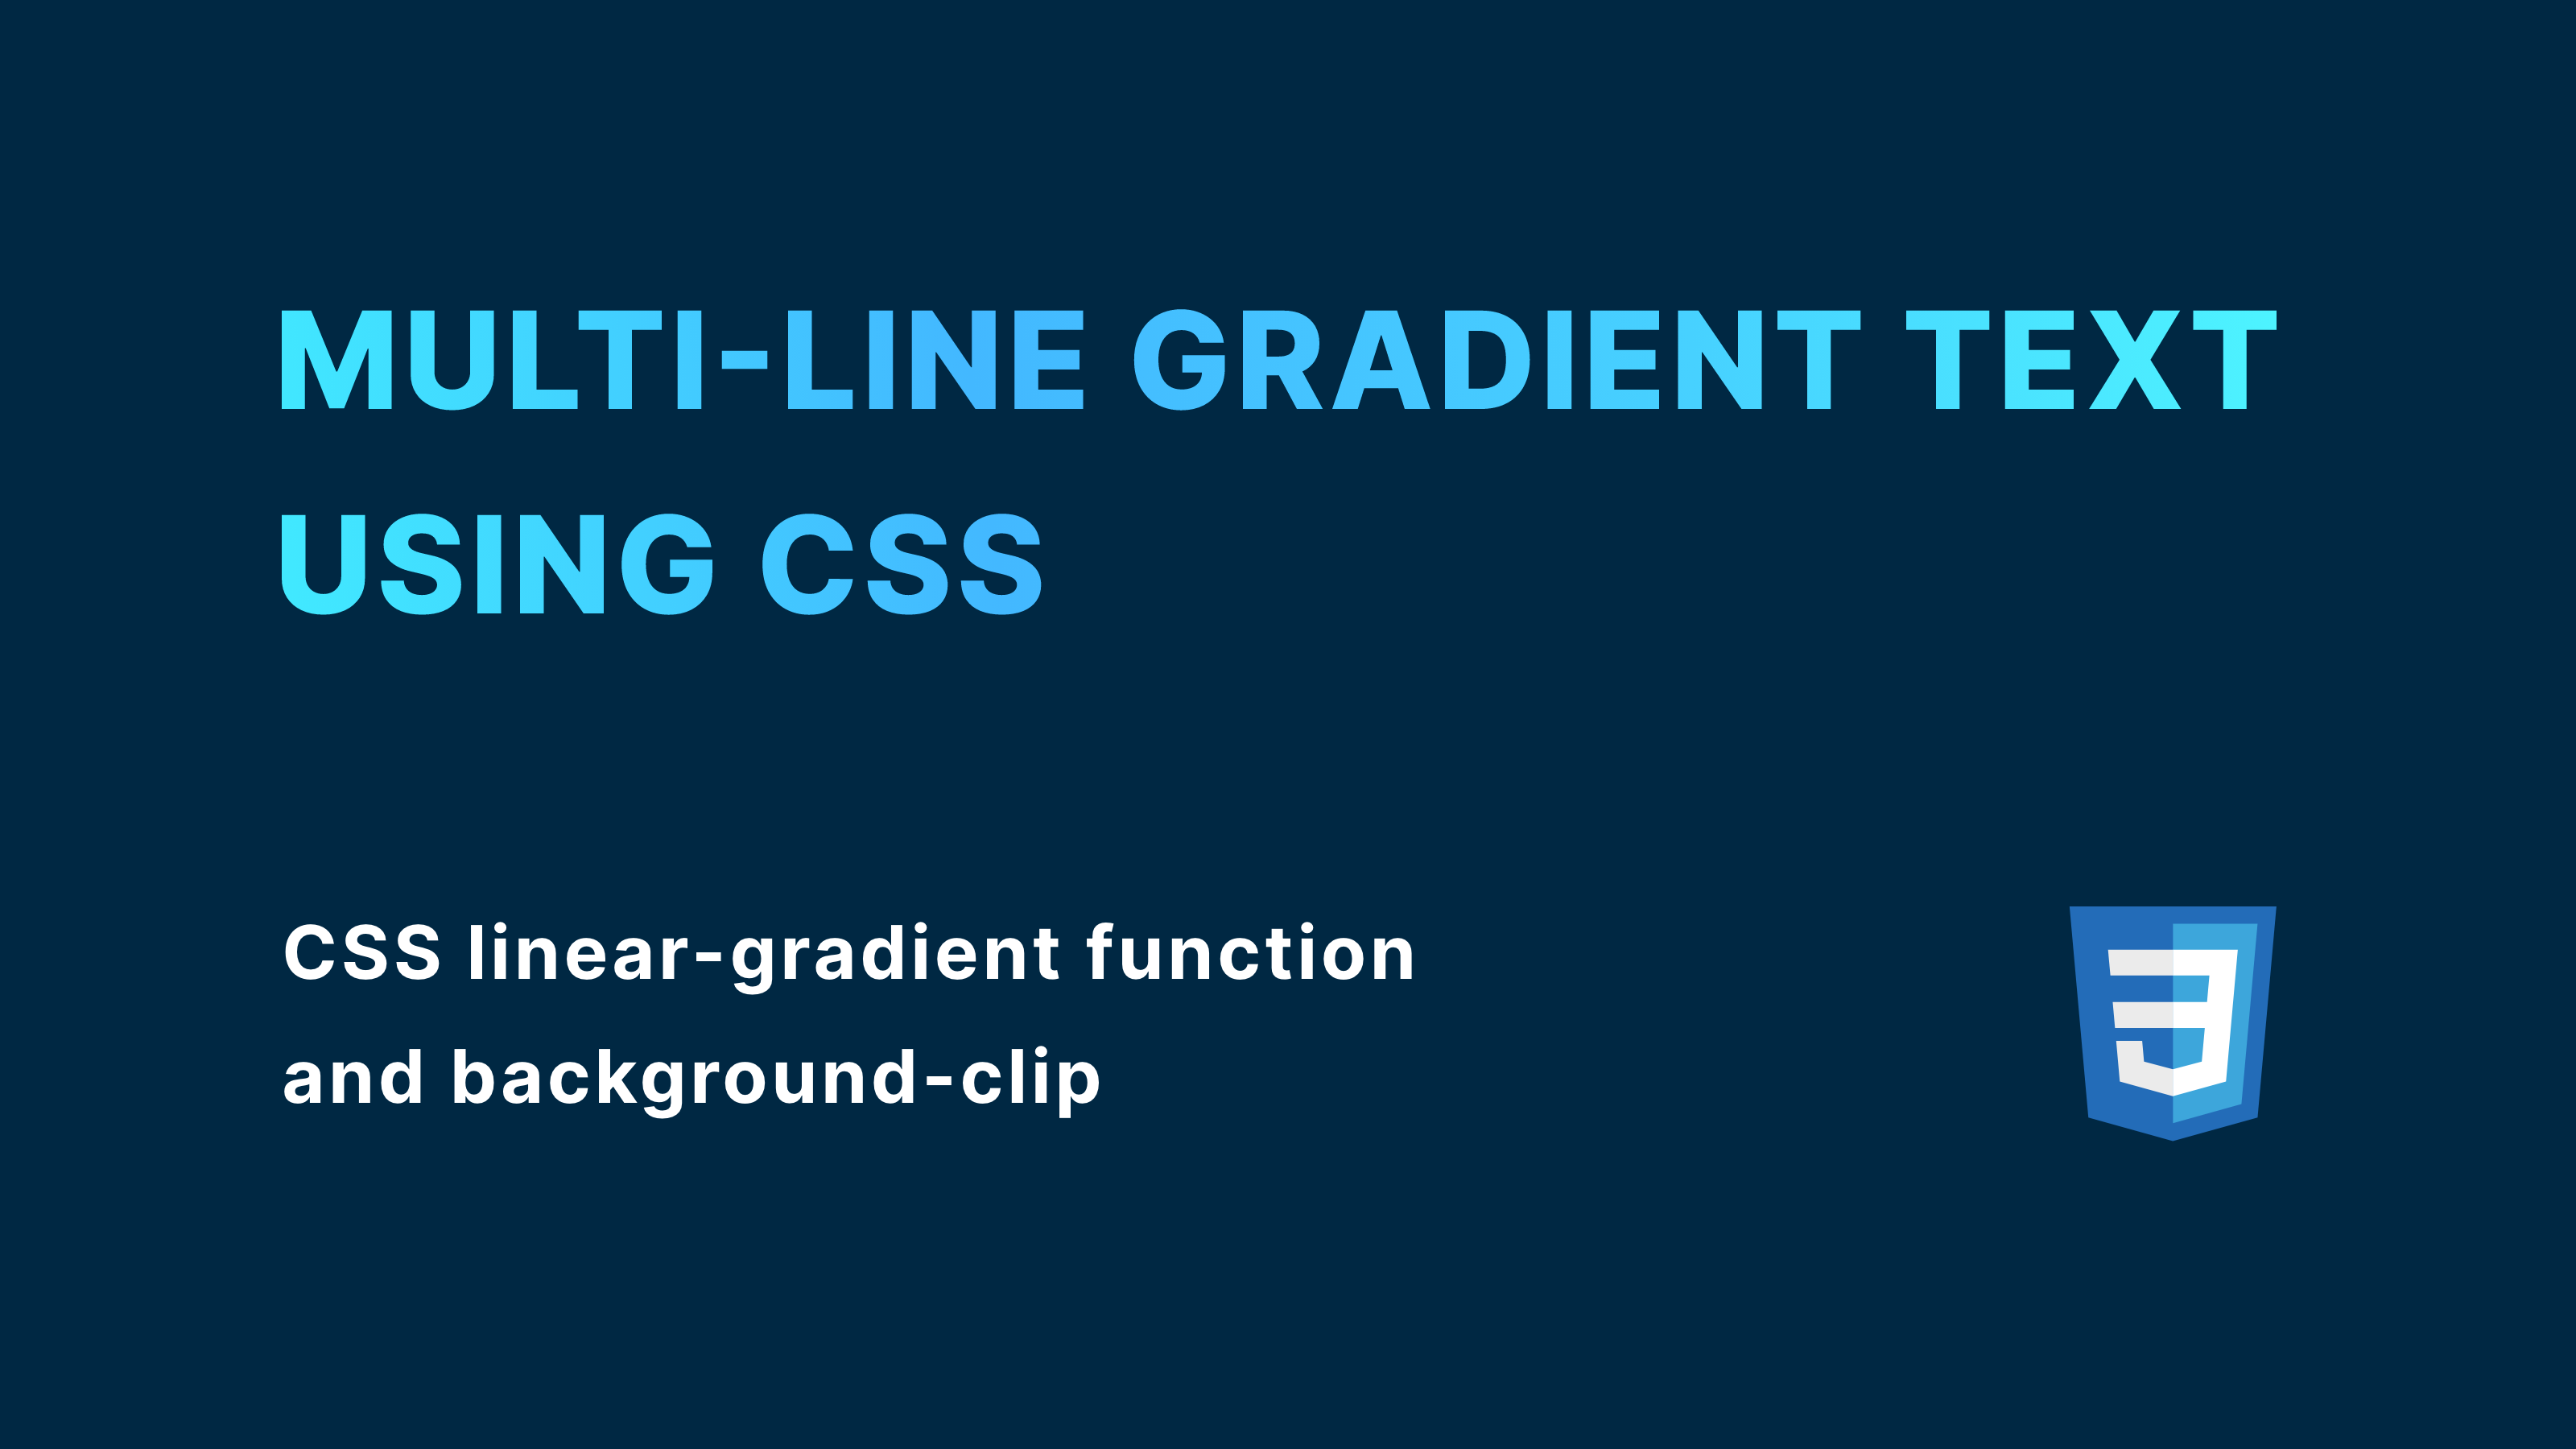 Create a multi-line gradient text using CSS